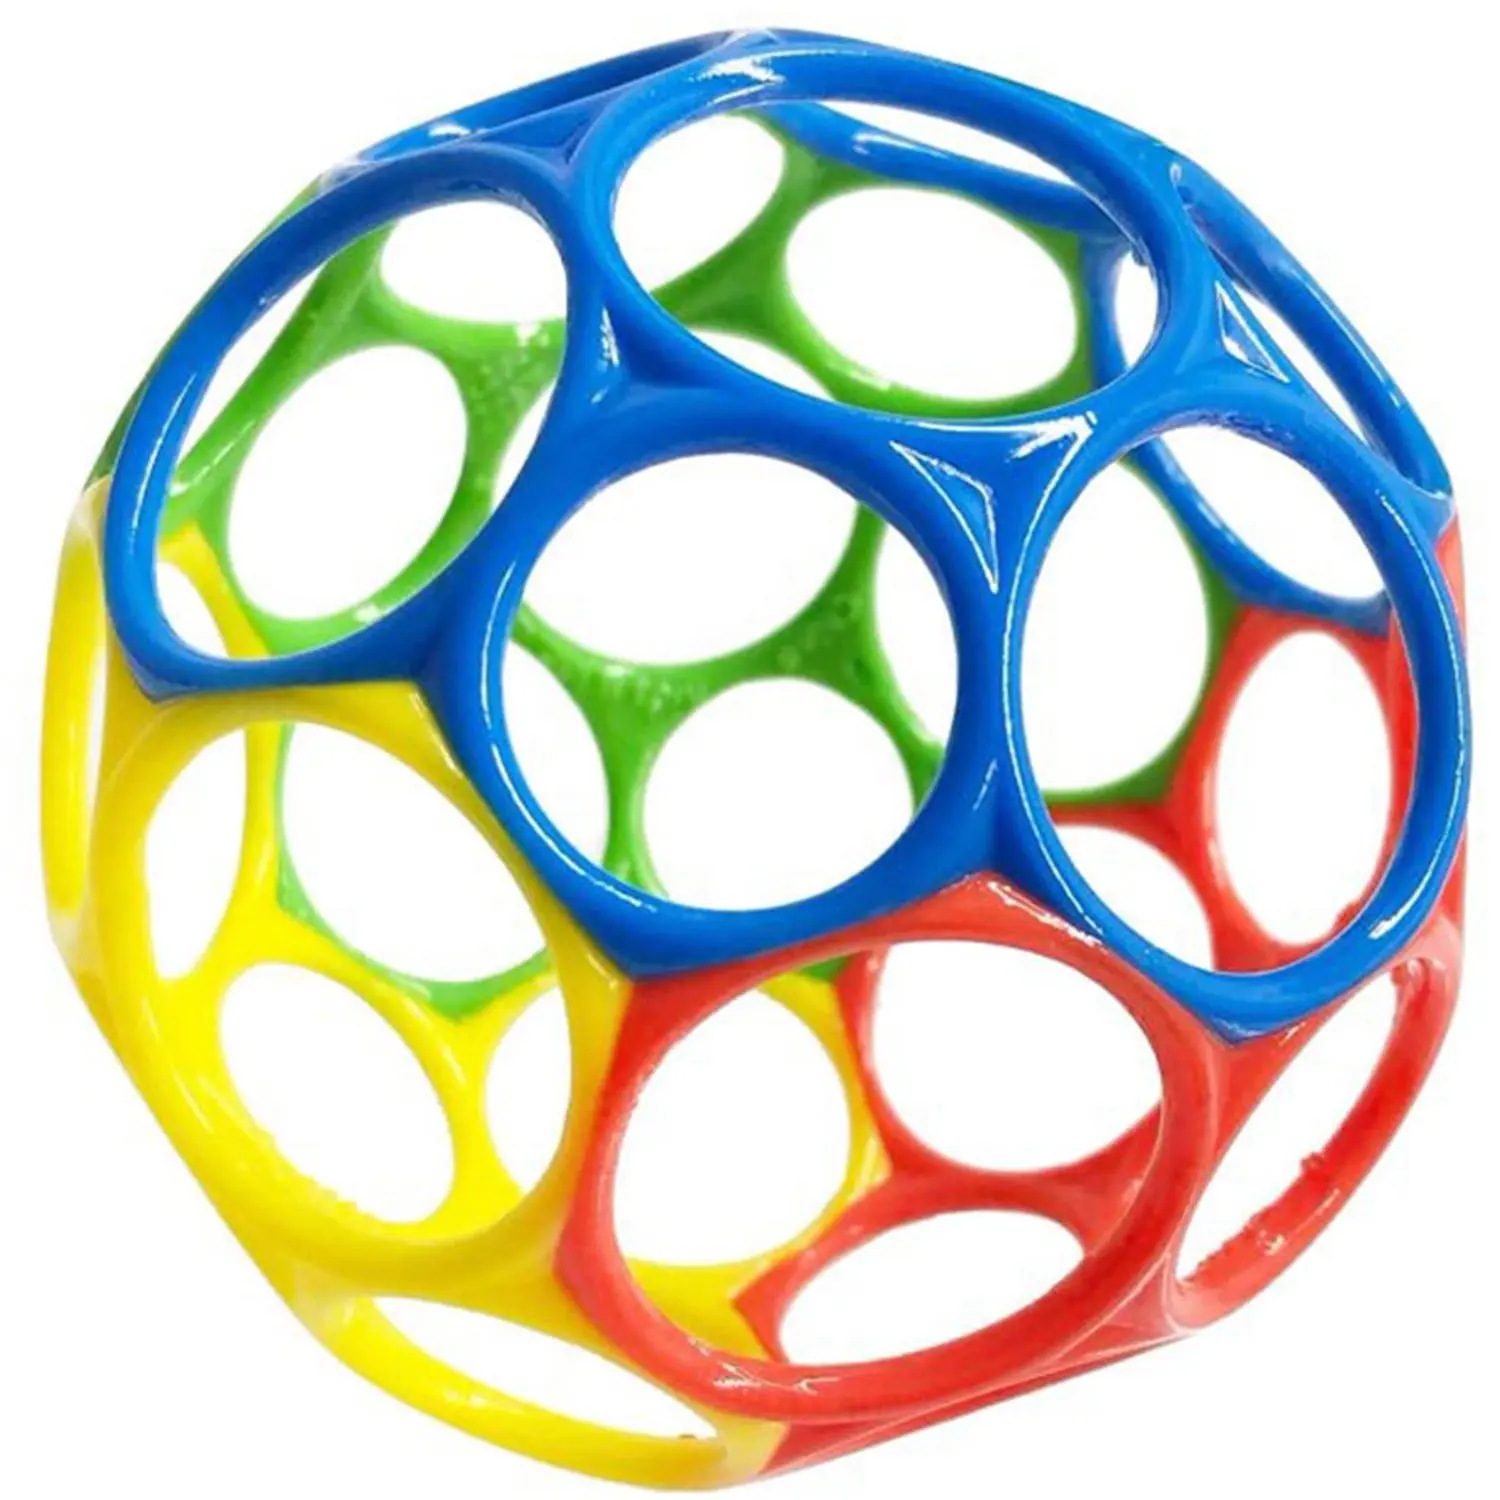 Oball Easy Grasp Classic Ball BPA-Free Infant Toy Red, Yellow, Green, Blue, Ages 0-24Months